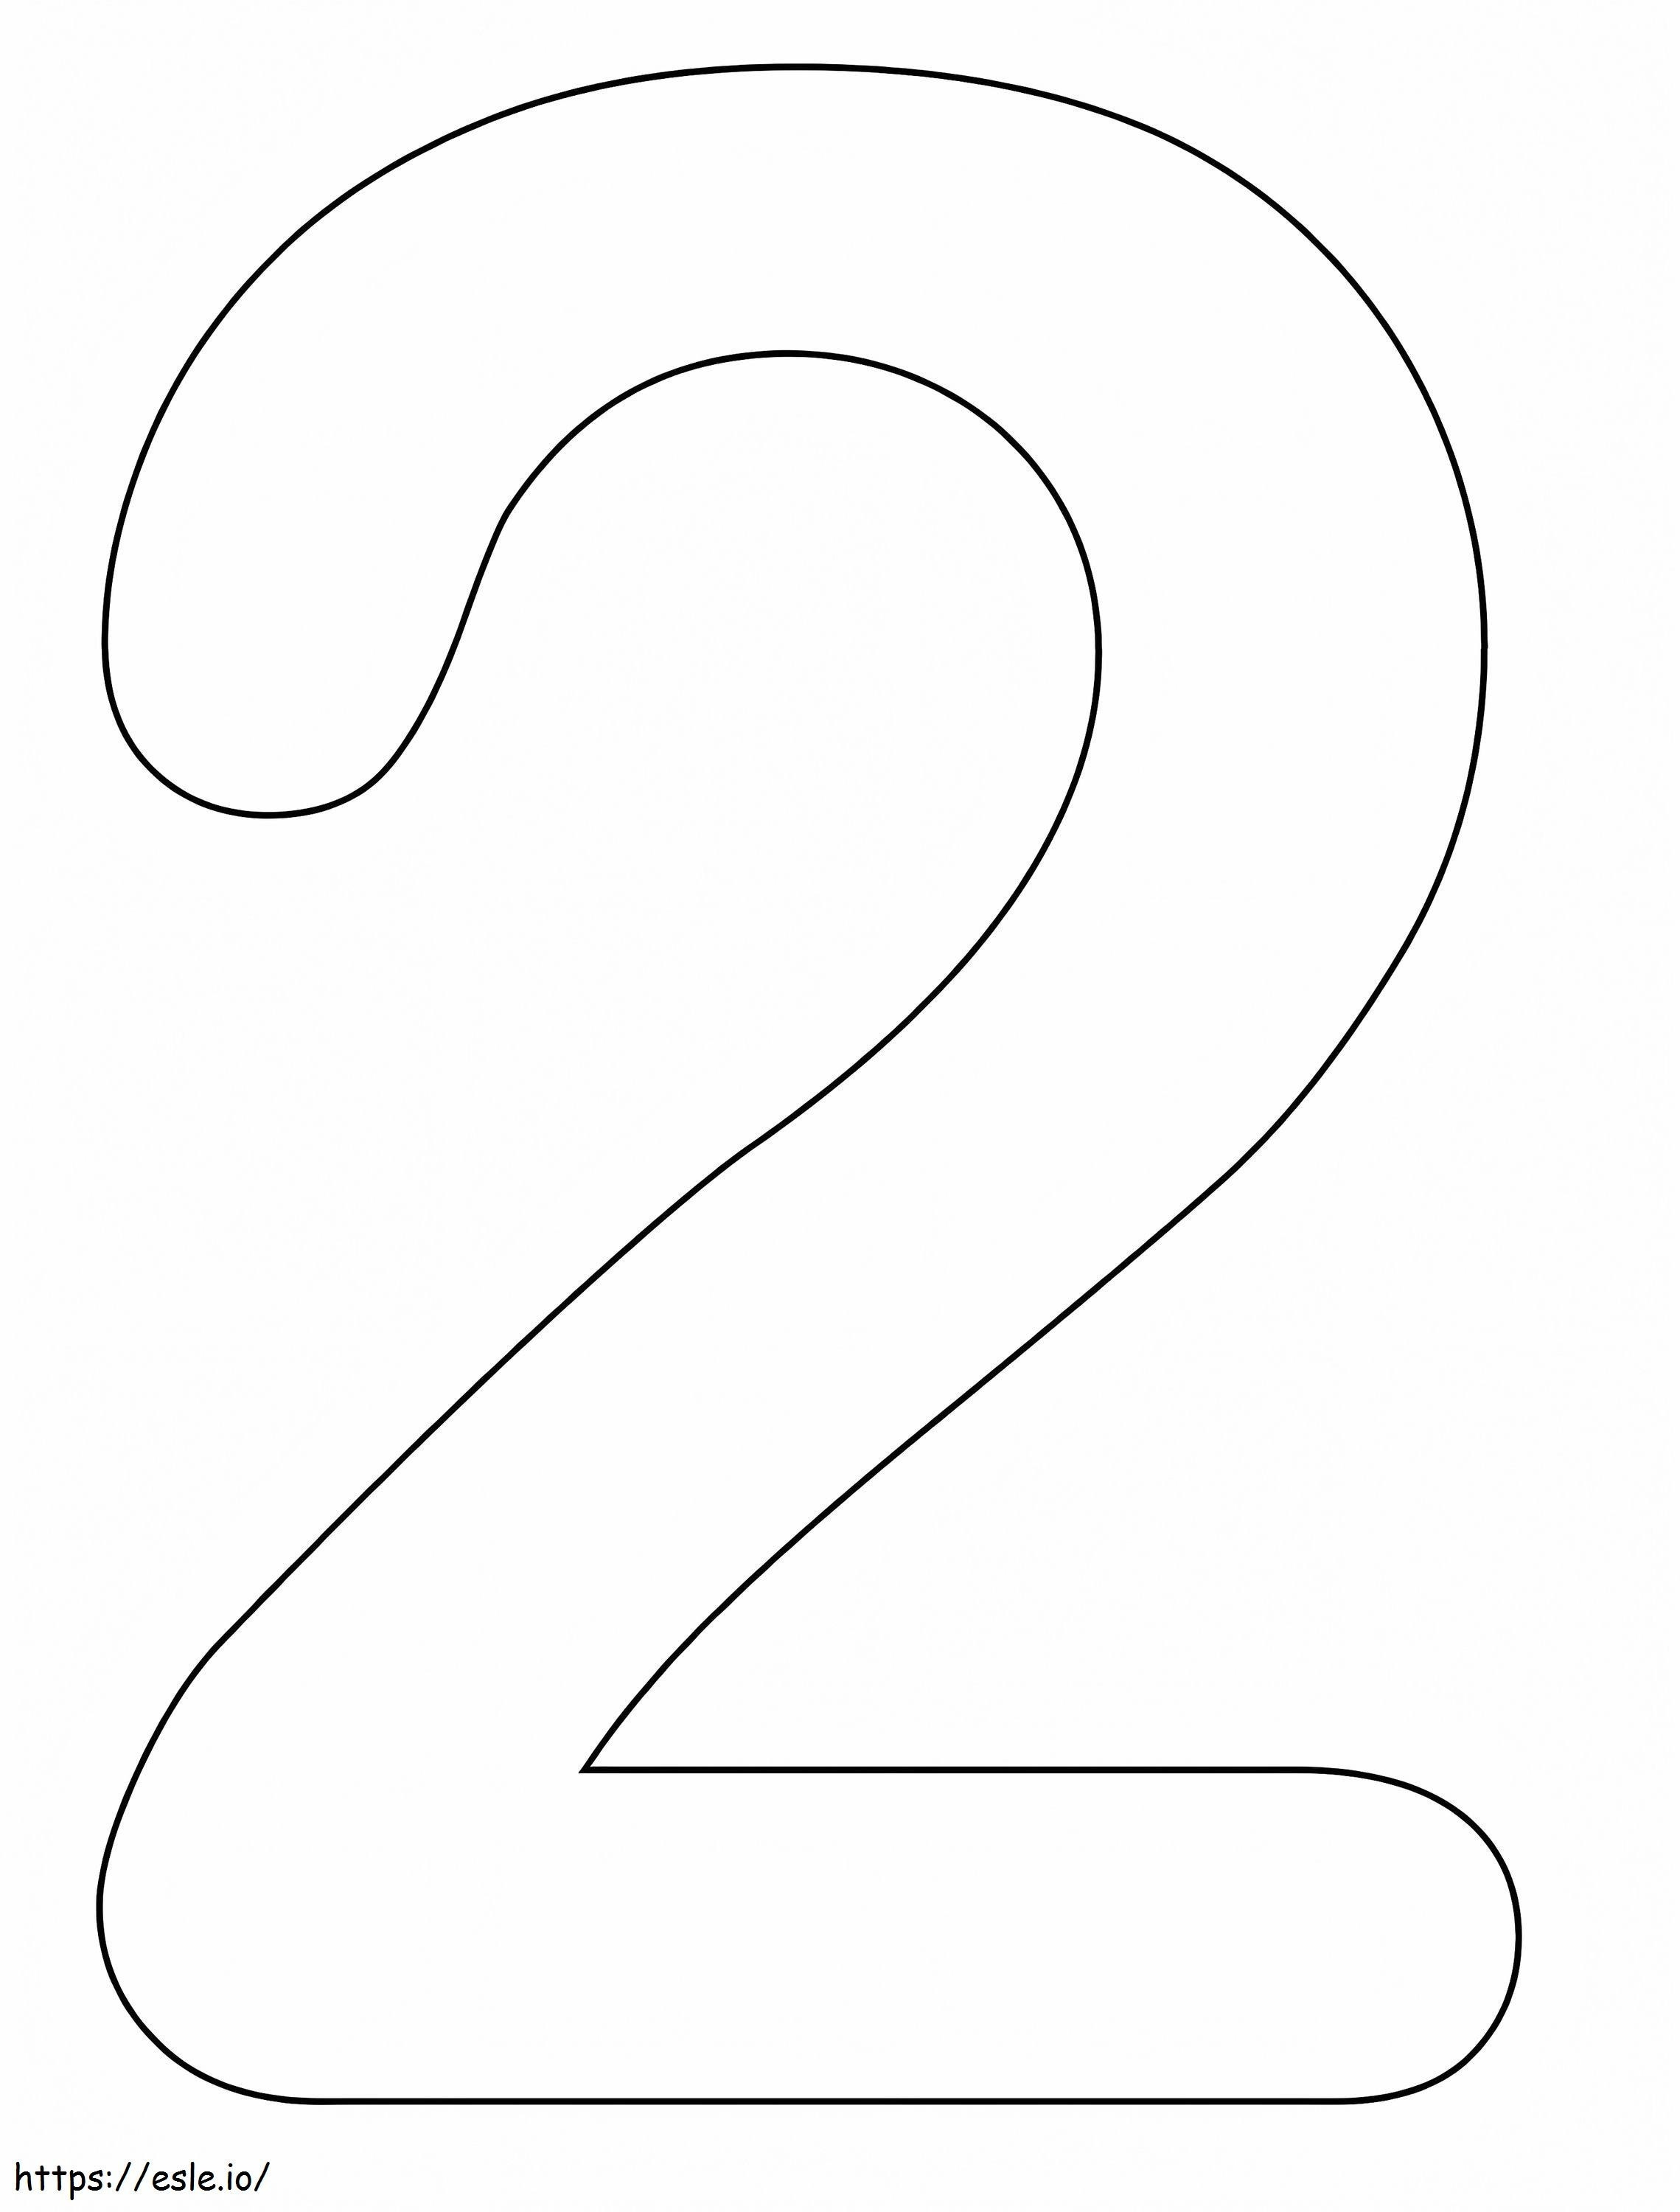 Printable Number 2 coloring page